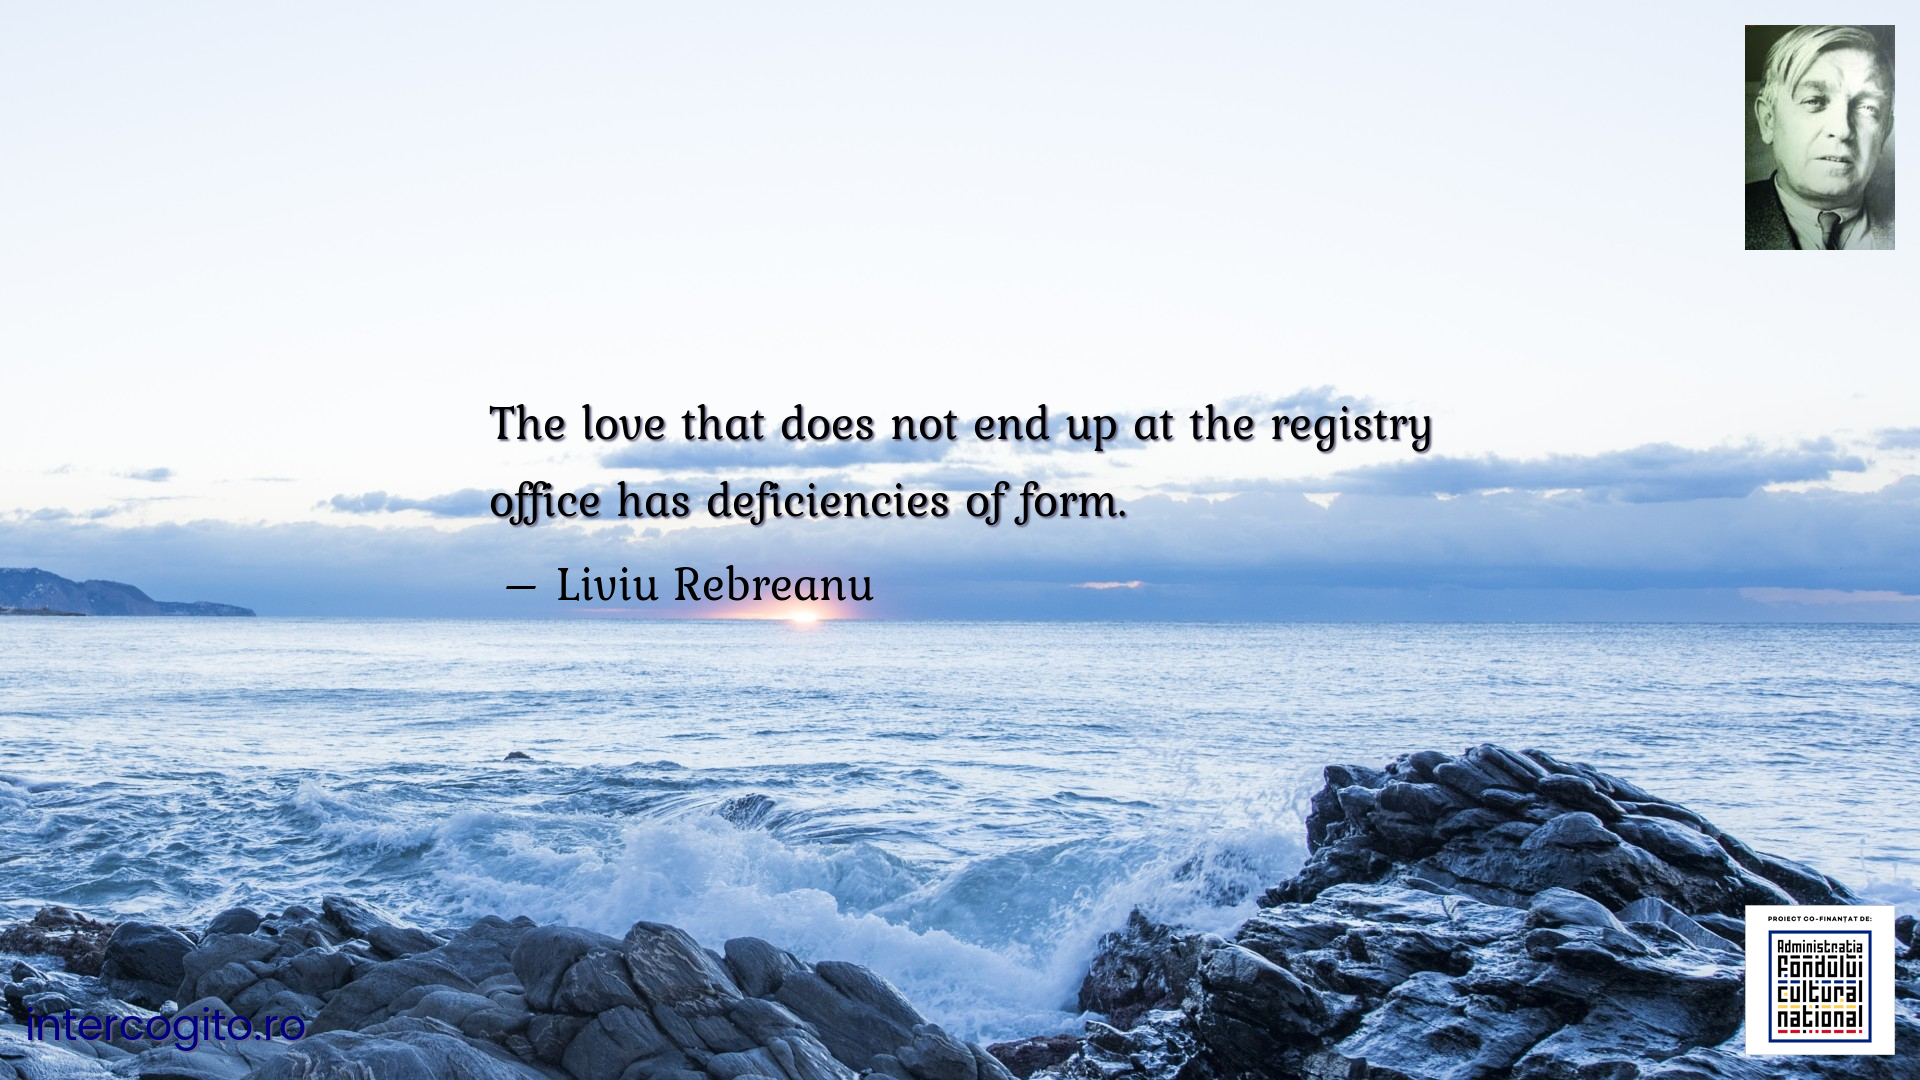 The love that does not end up at the registry office has deficiencies of form.